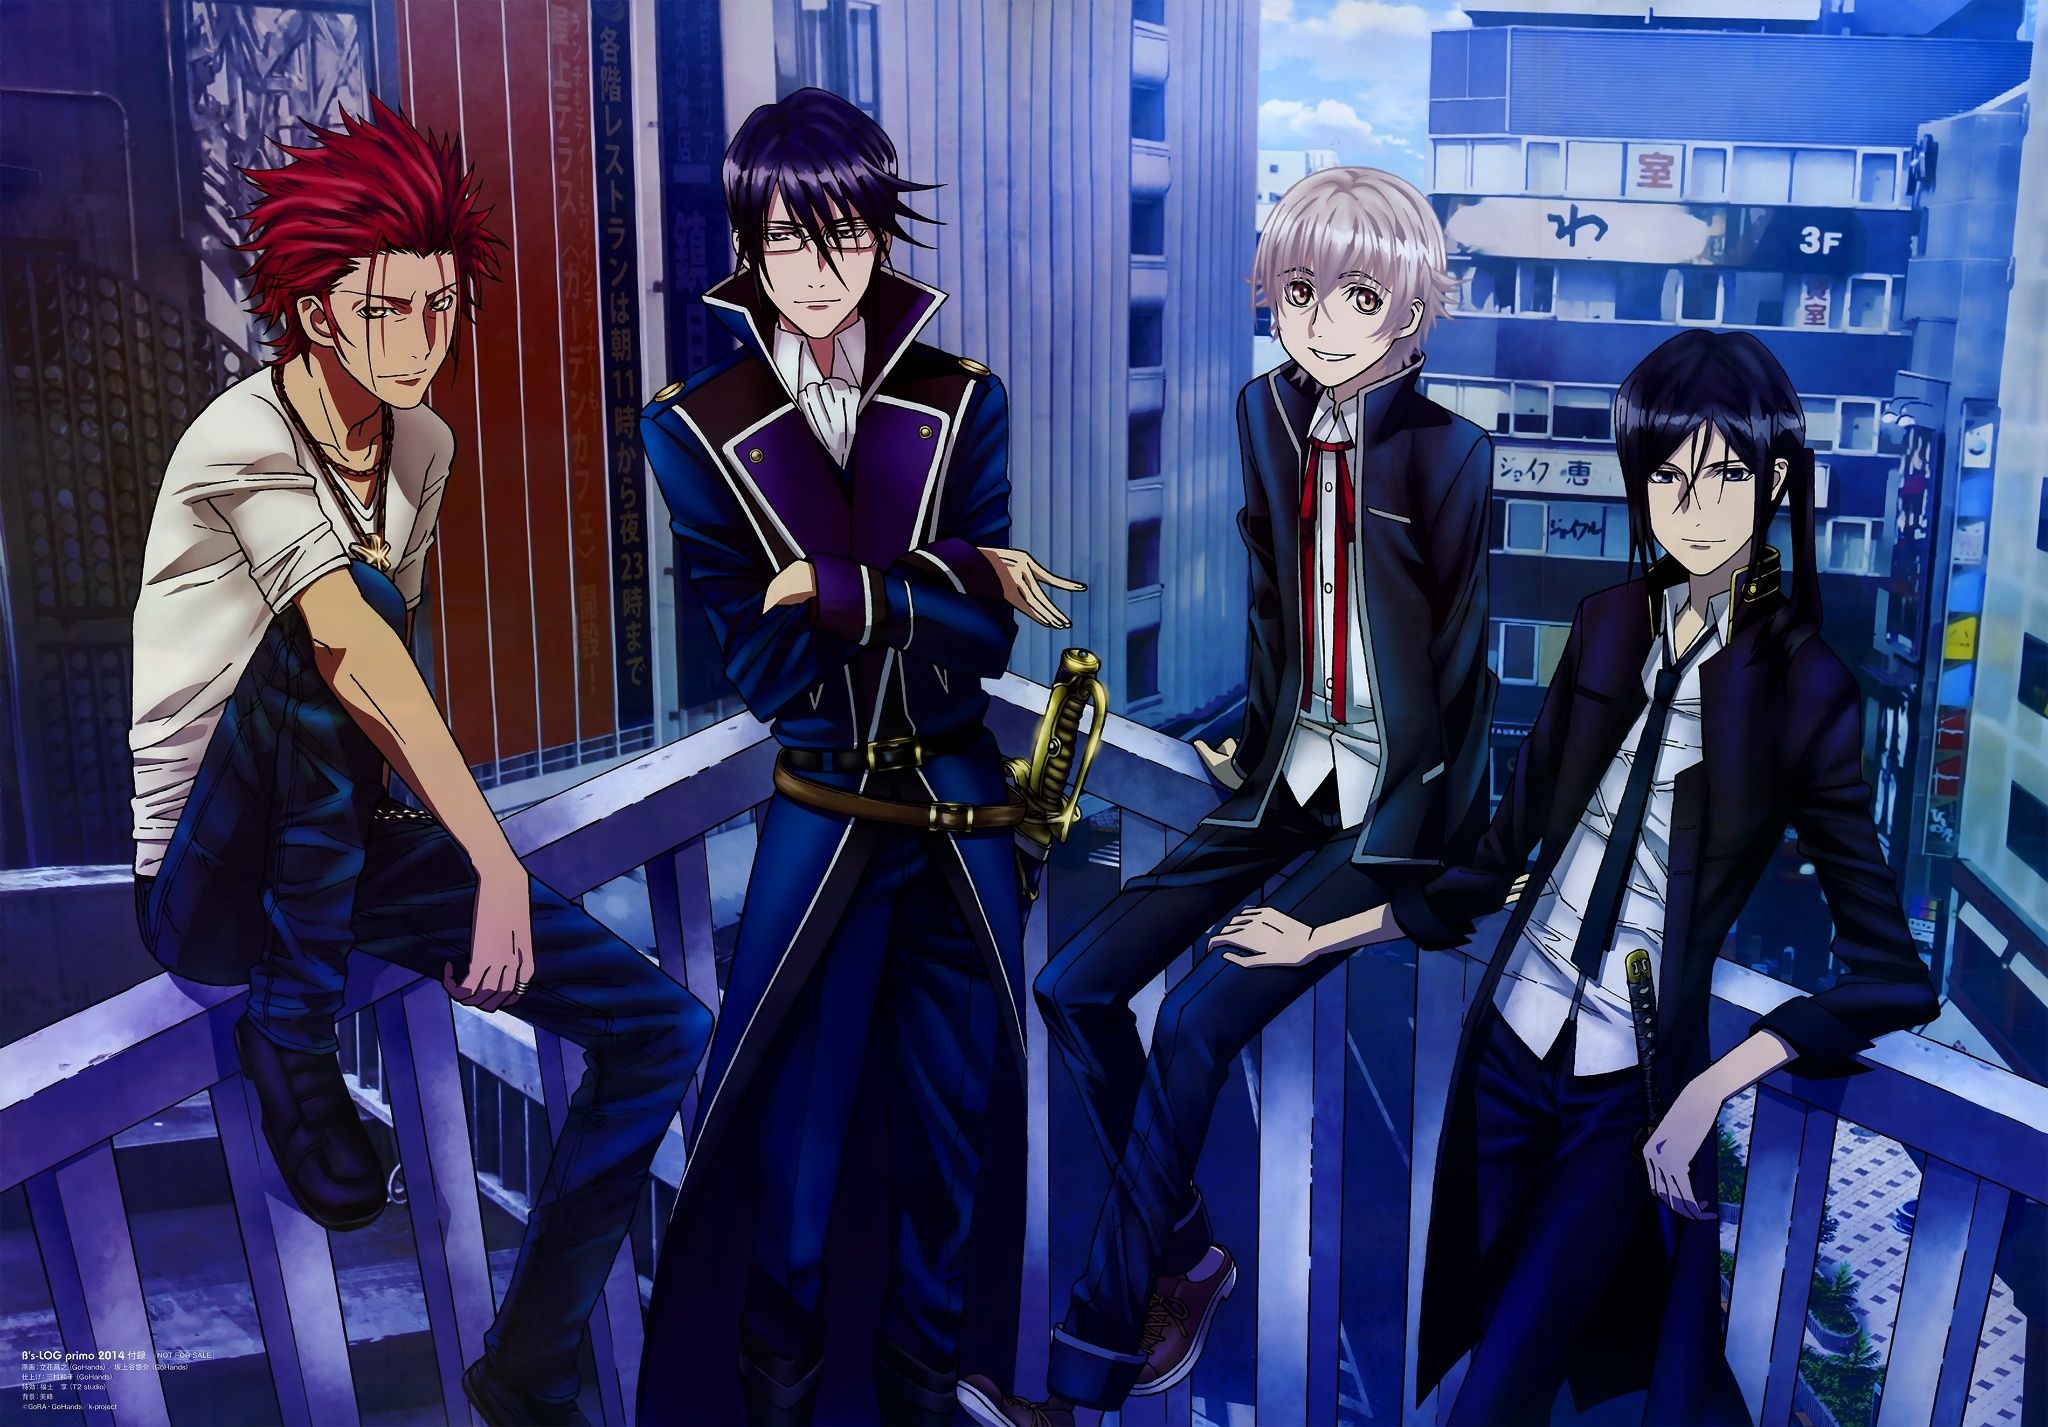 Watch Order Of K-Project, How To Watch? - OtakuKart